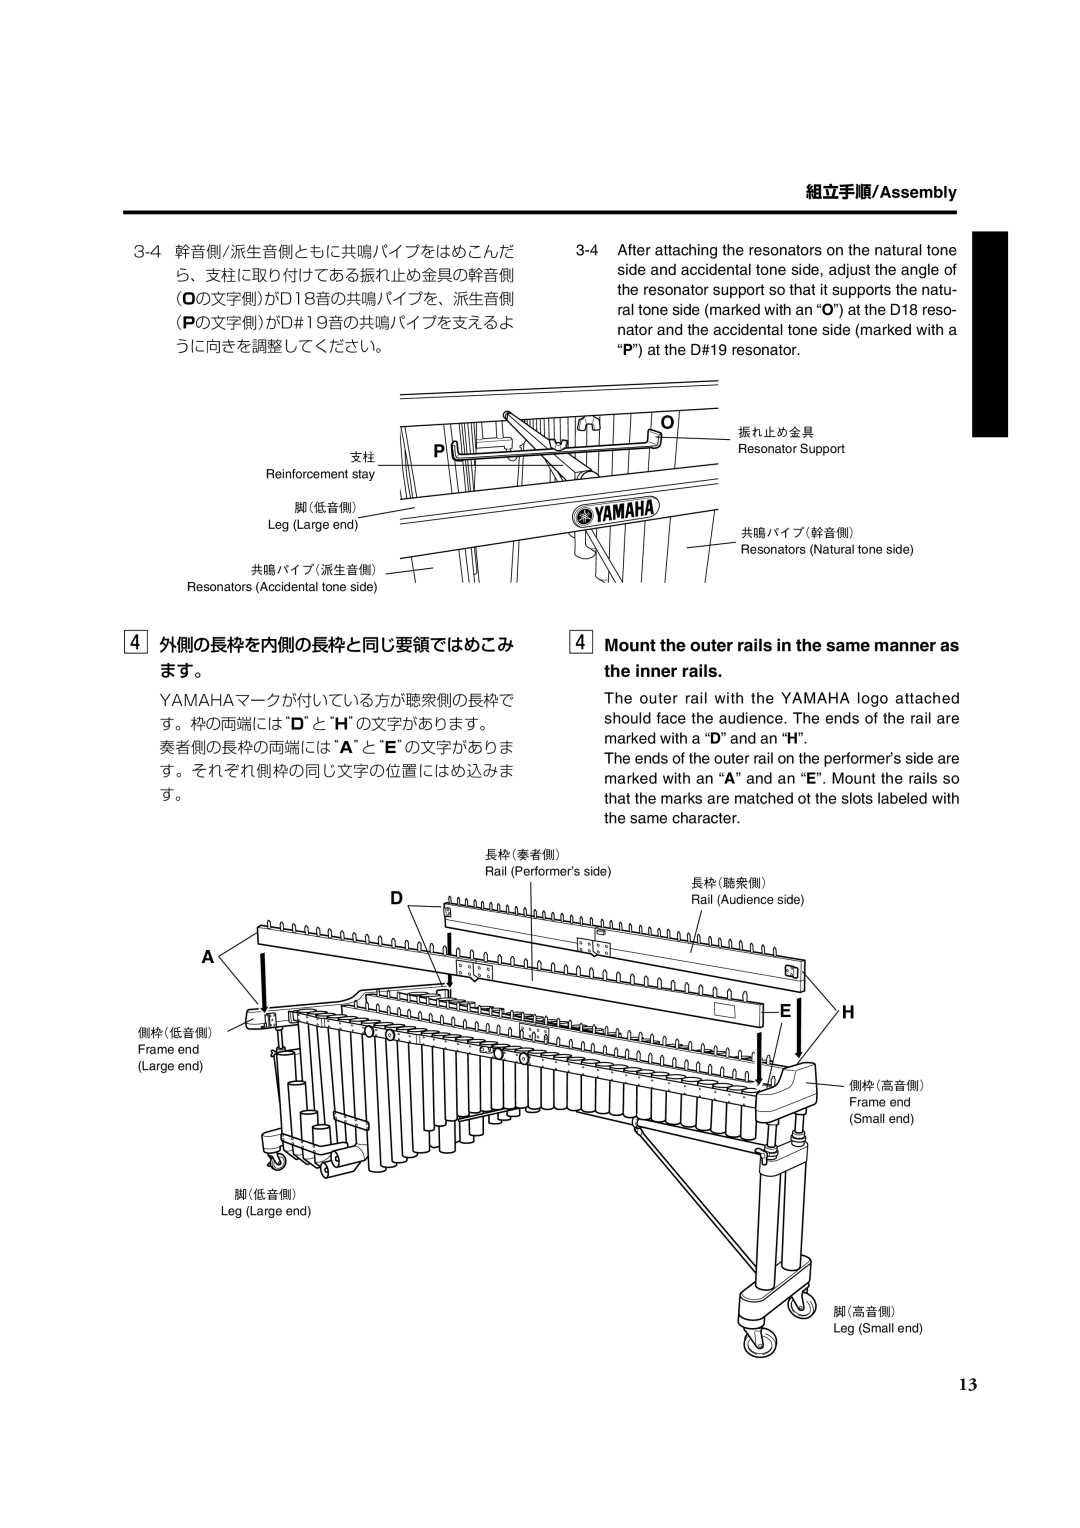 Yamaha YM6100 v 外側の長枠を内側の長枠と同じ要領ではめこみ ます。, v Mount the outer rails in the same manner as the inner rails, うに向きを調整してください。 